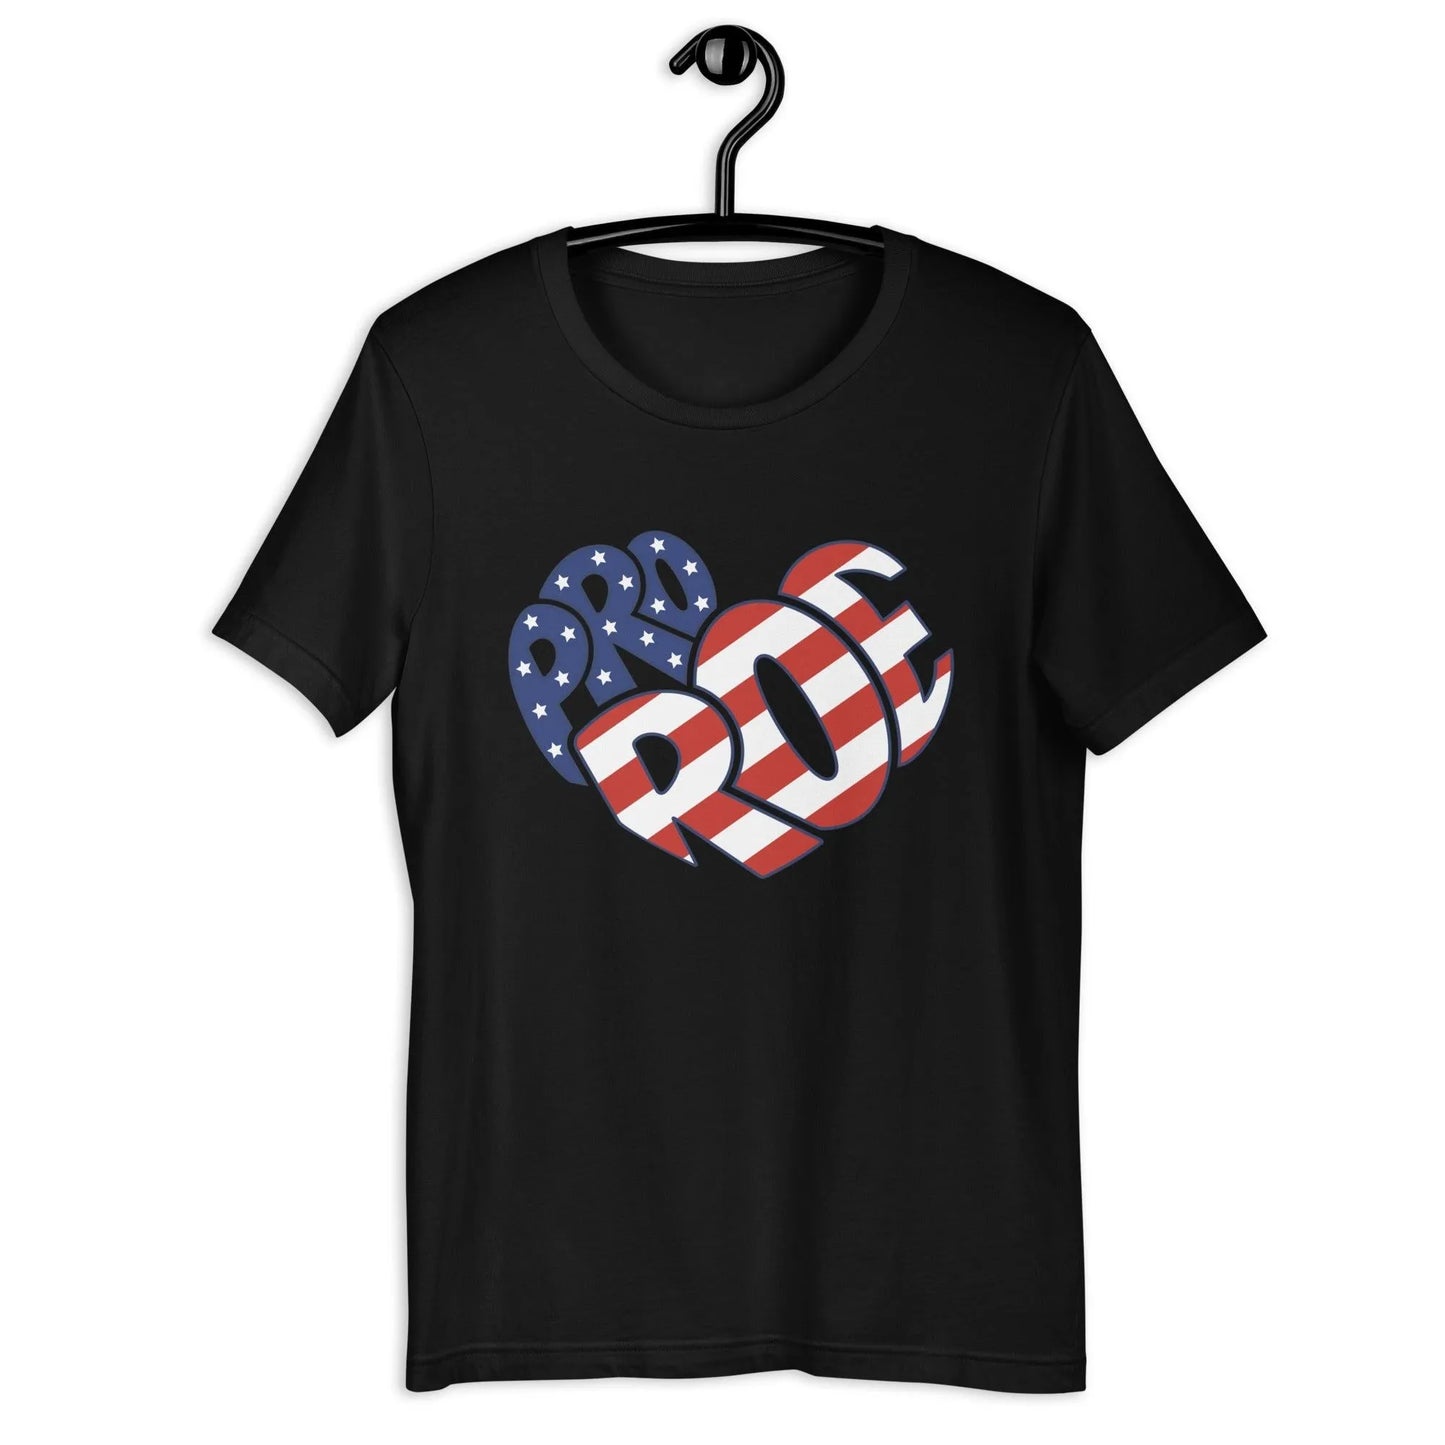 Pro Roe Abortion Rights unisex USA stars and striped t-shirt Rebel Girl Rampage